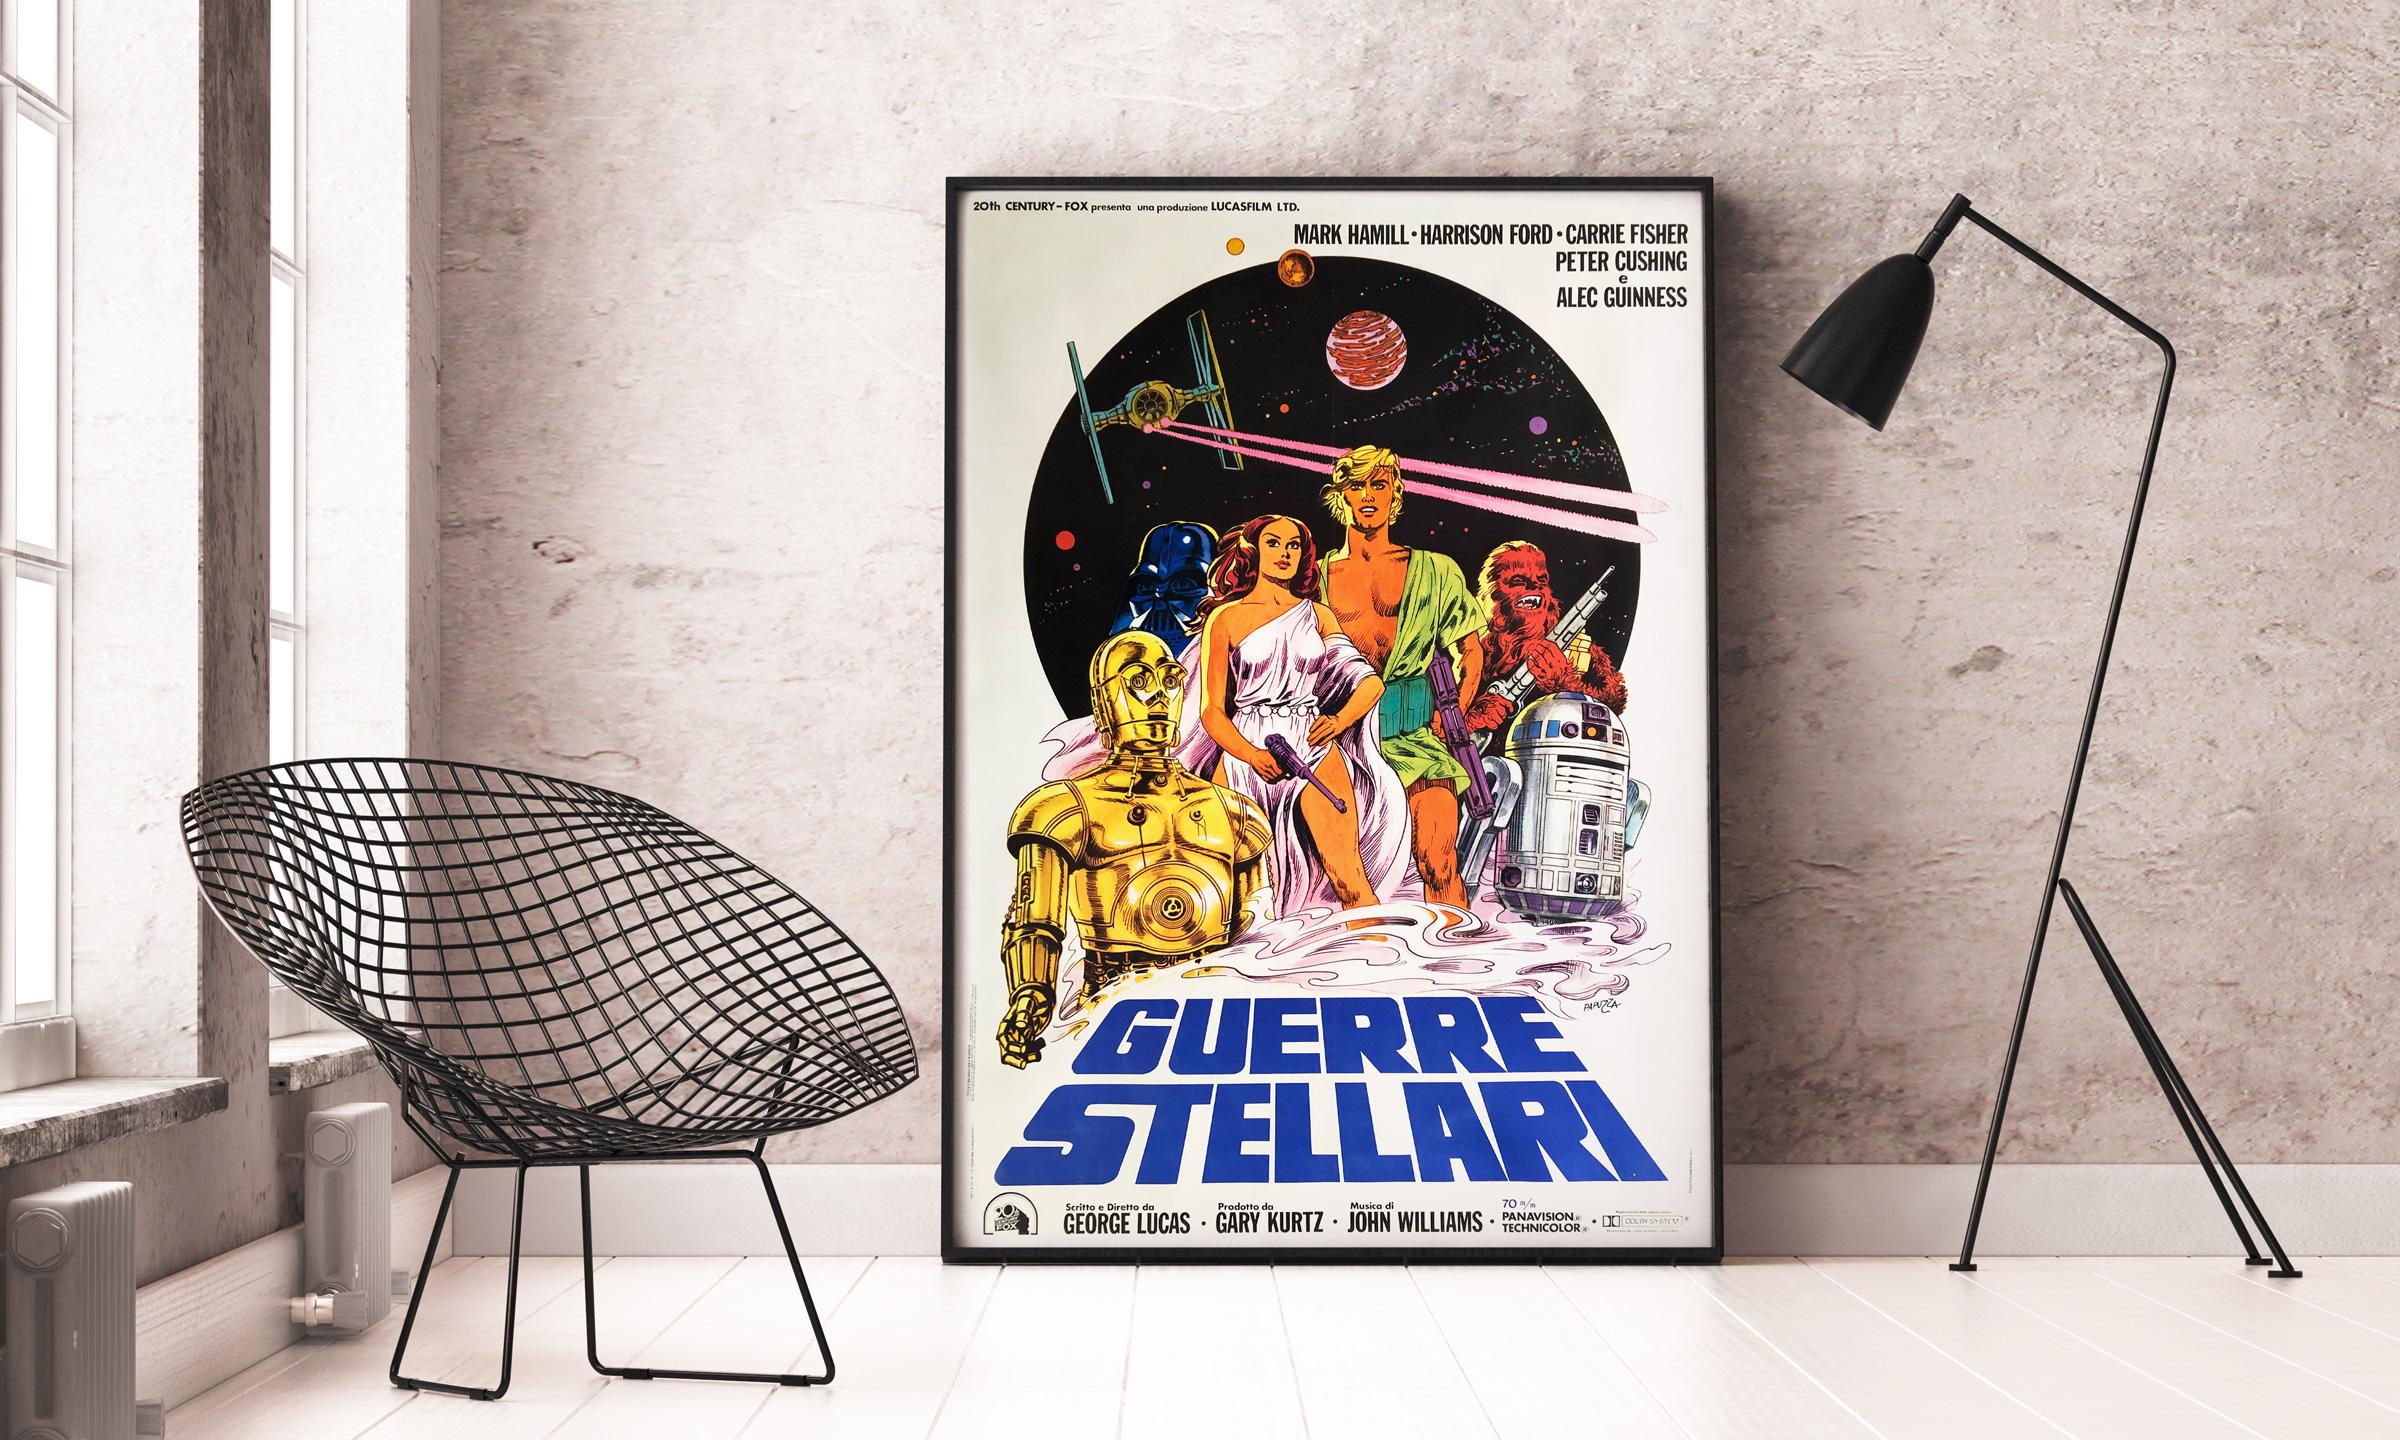 Michelangelo Papuzza's super cool and stylised design for the Italian two sheet vintage film poster (39 x 55 inches). Works particularly well on the large-scale of this movie poster. 

This vintage movie poster has been professionally linen-backed